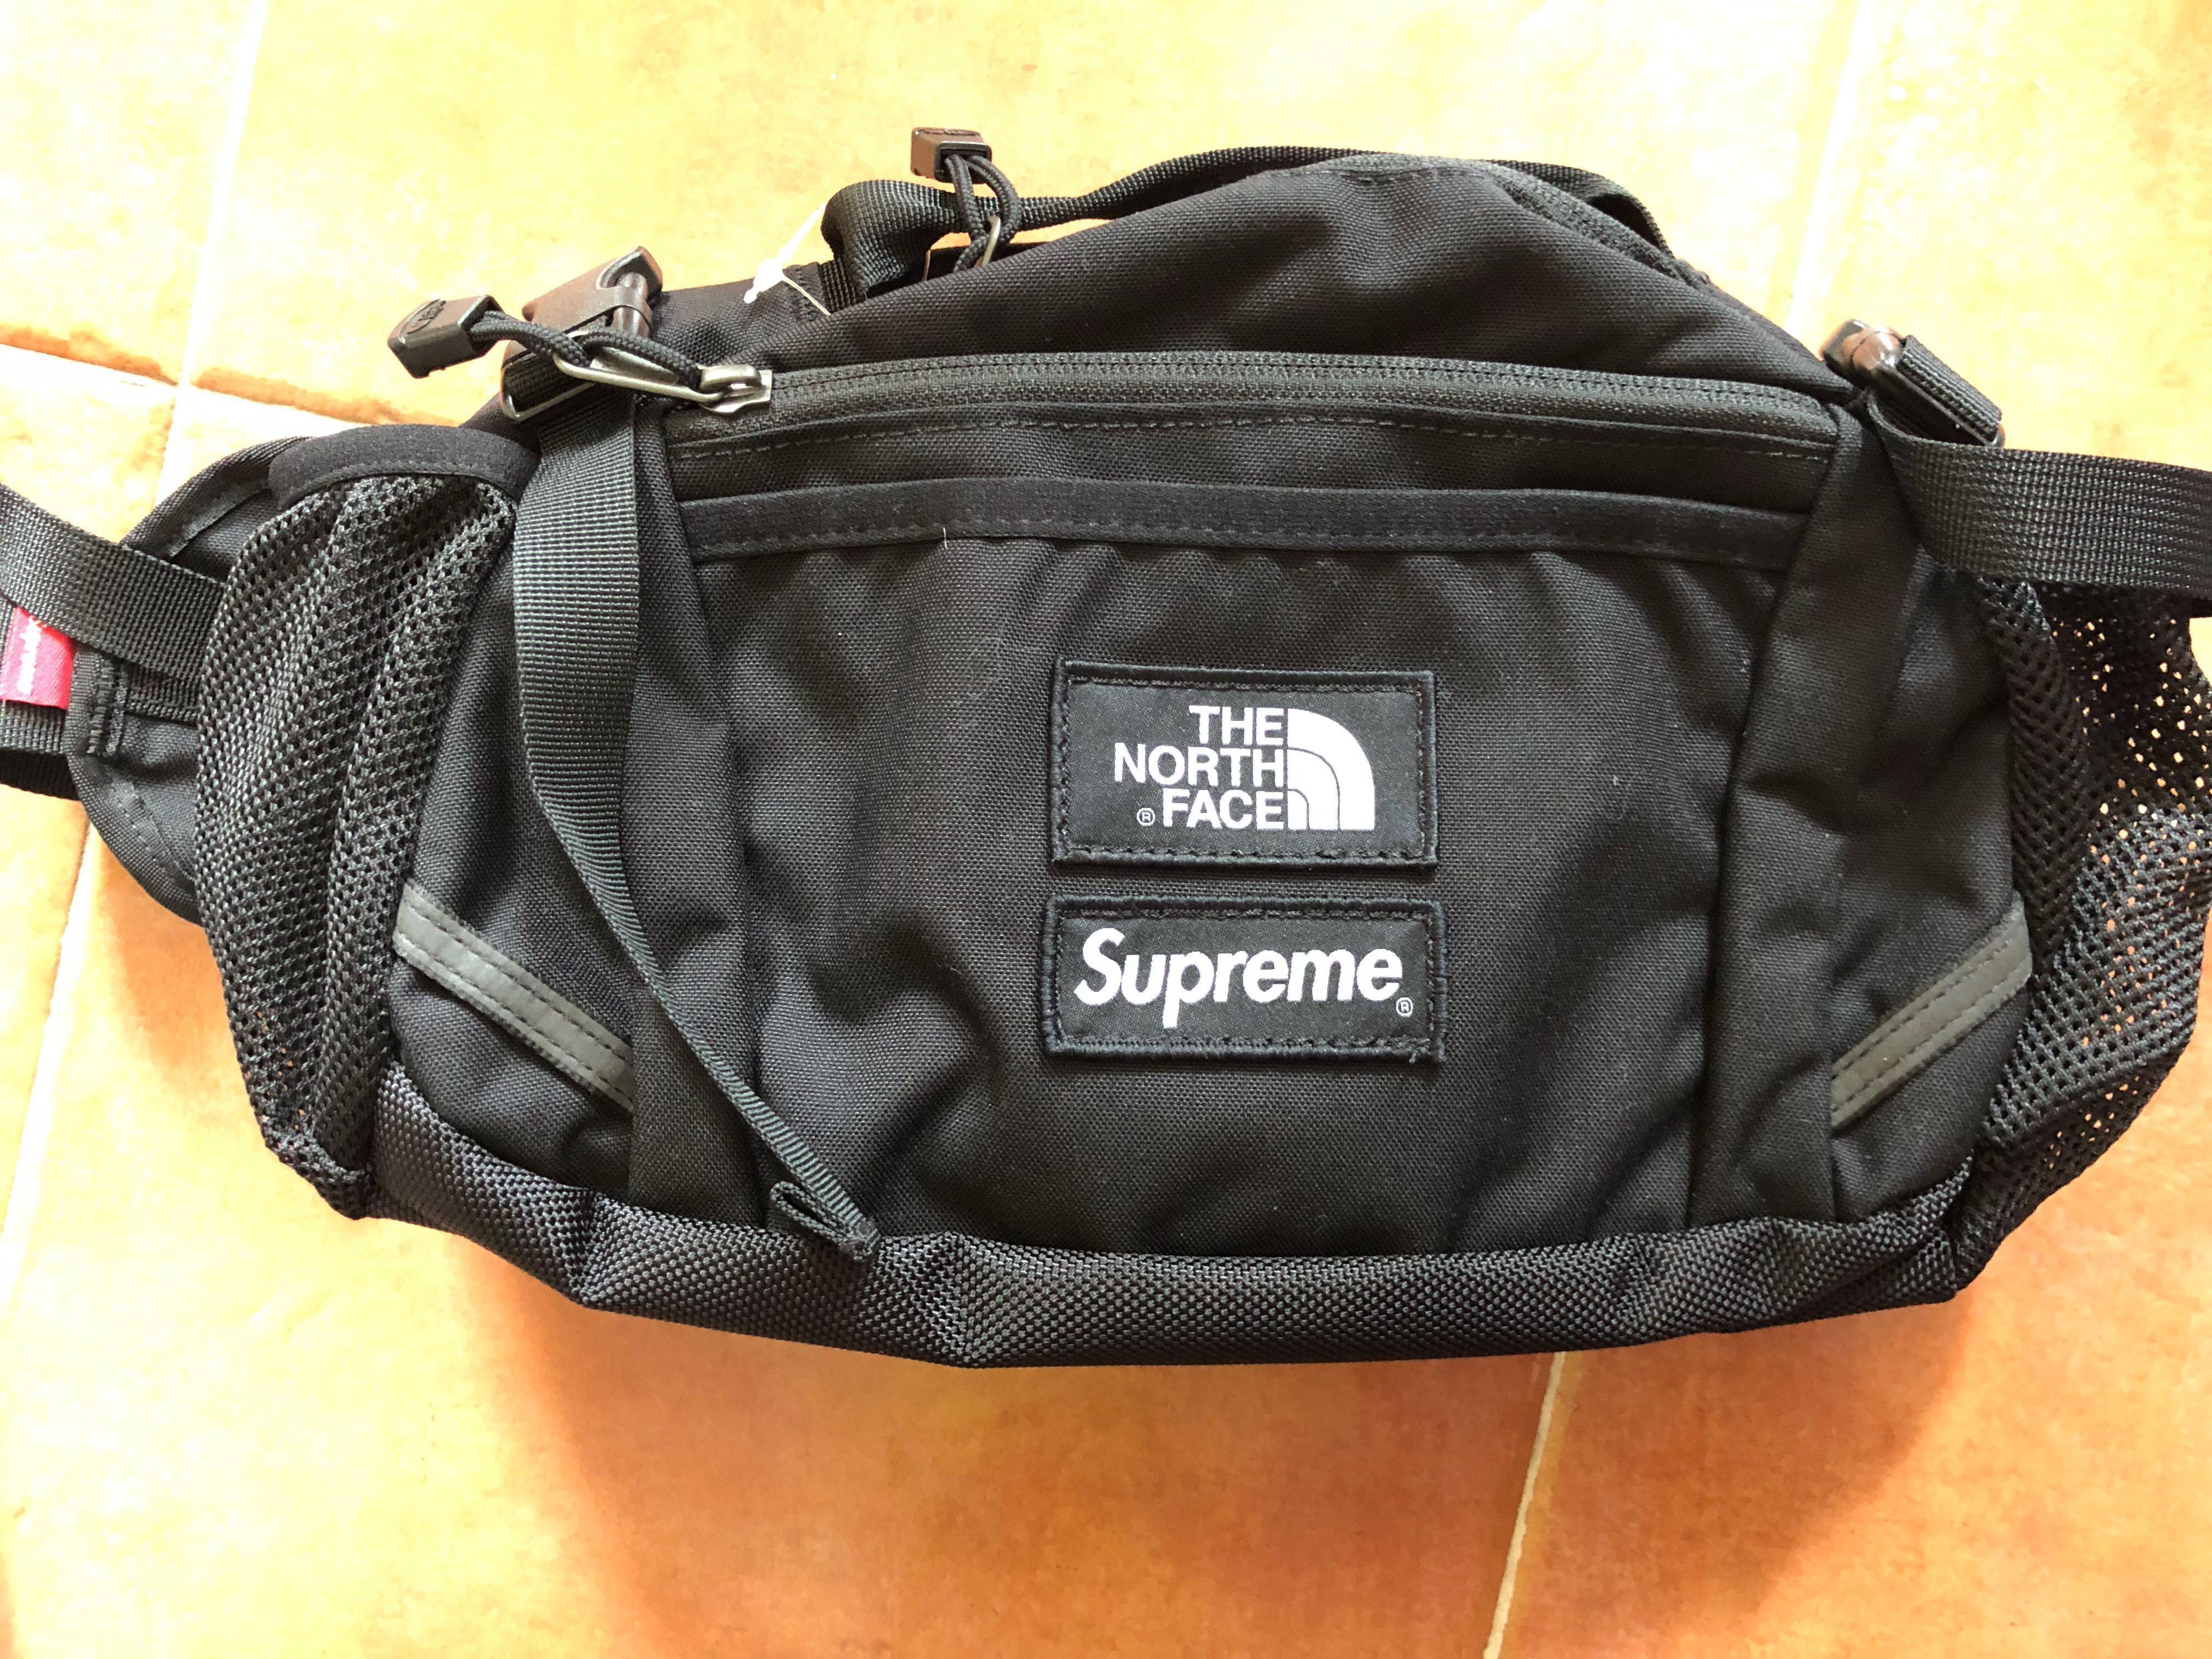 18fw Supreme The North Face waist bag